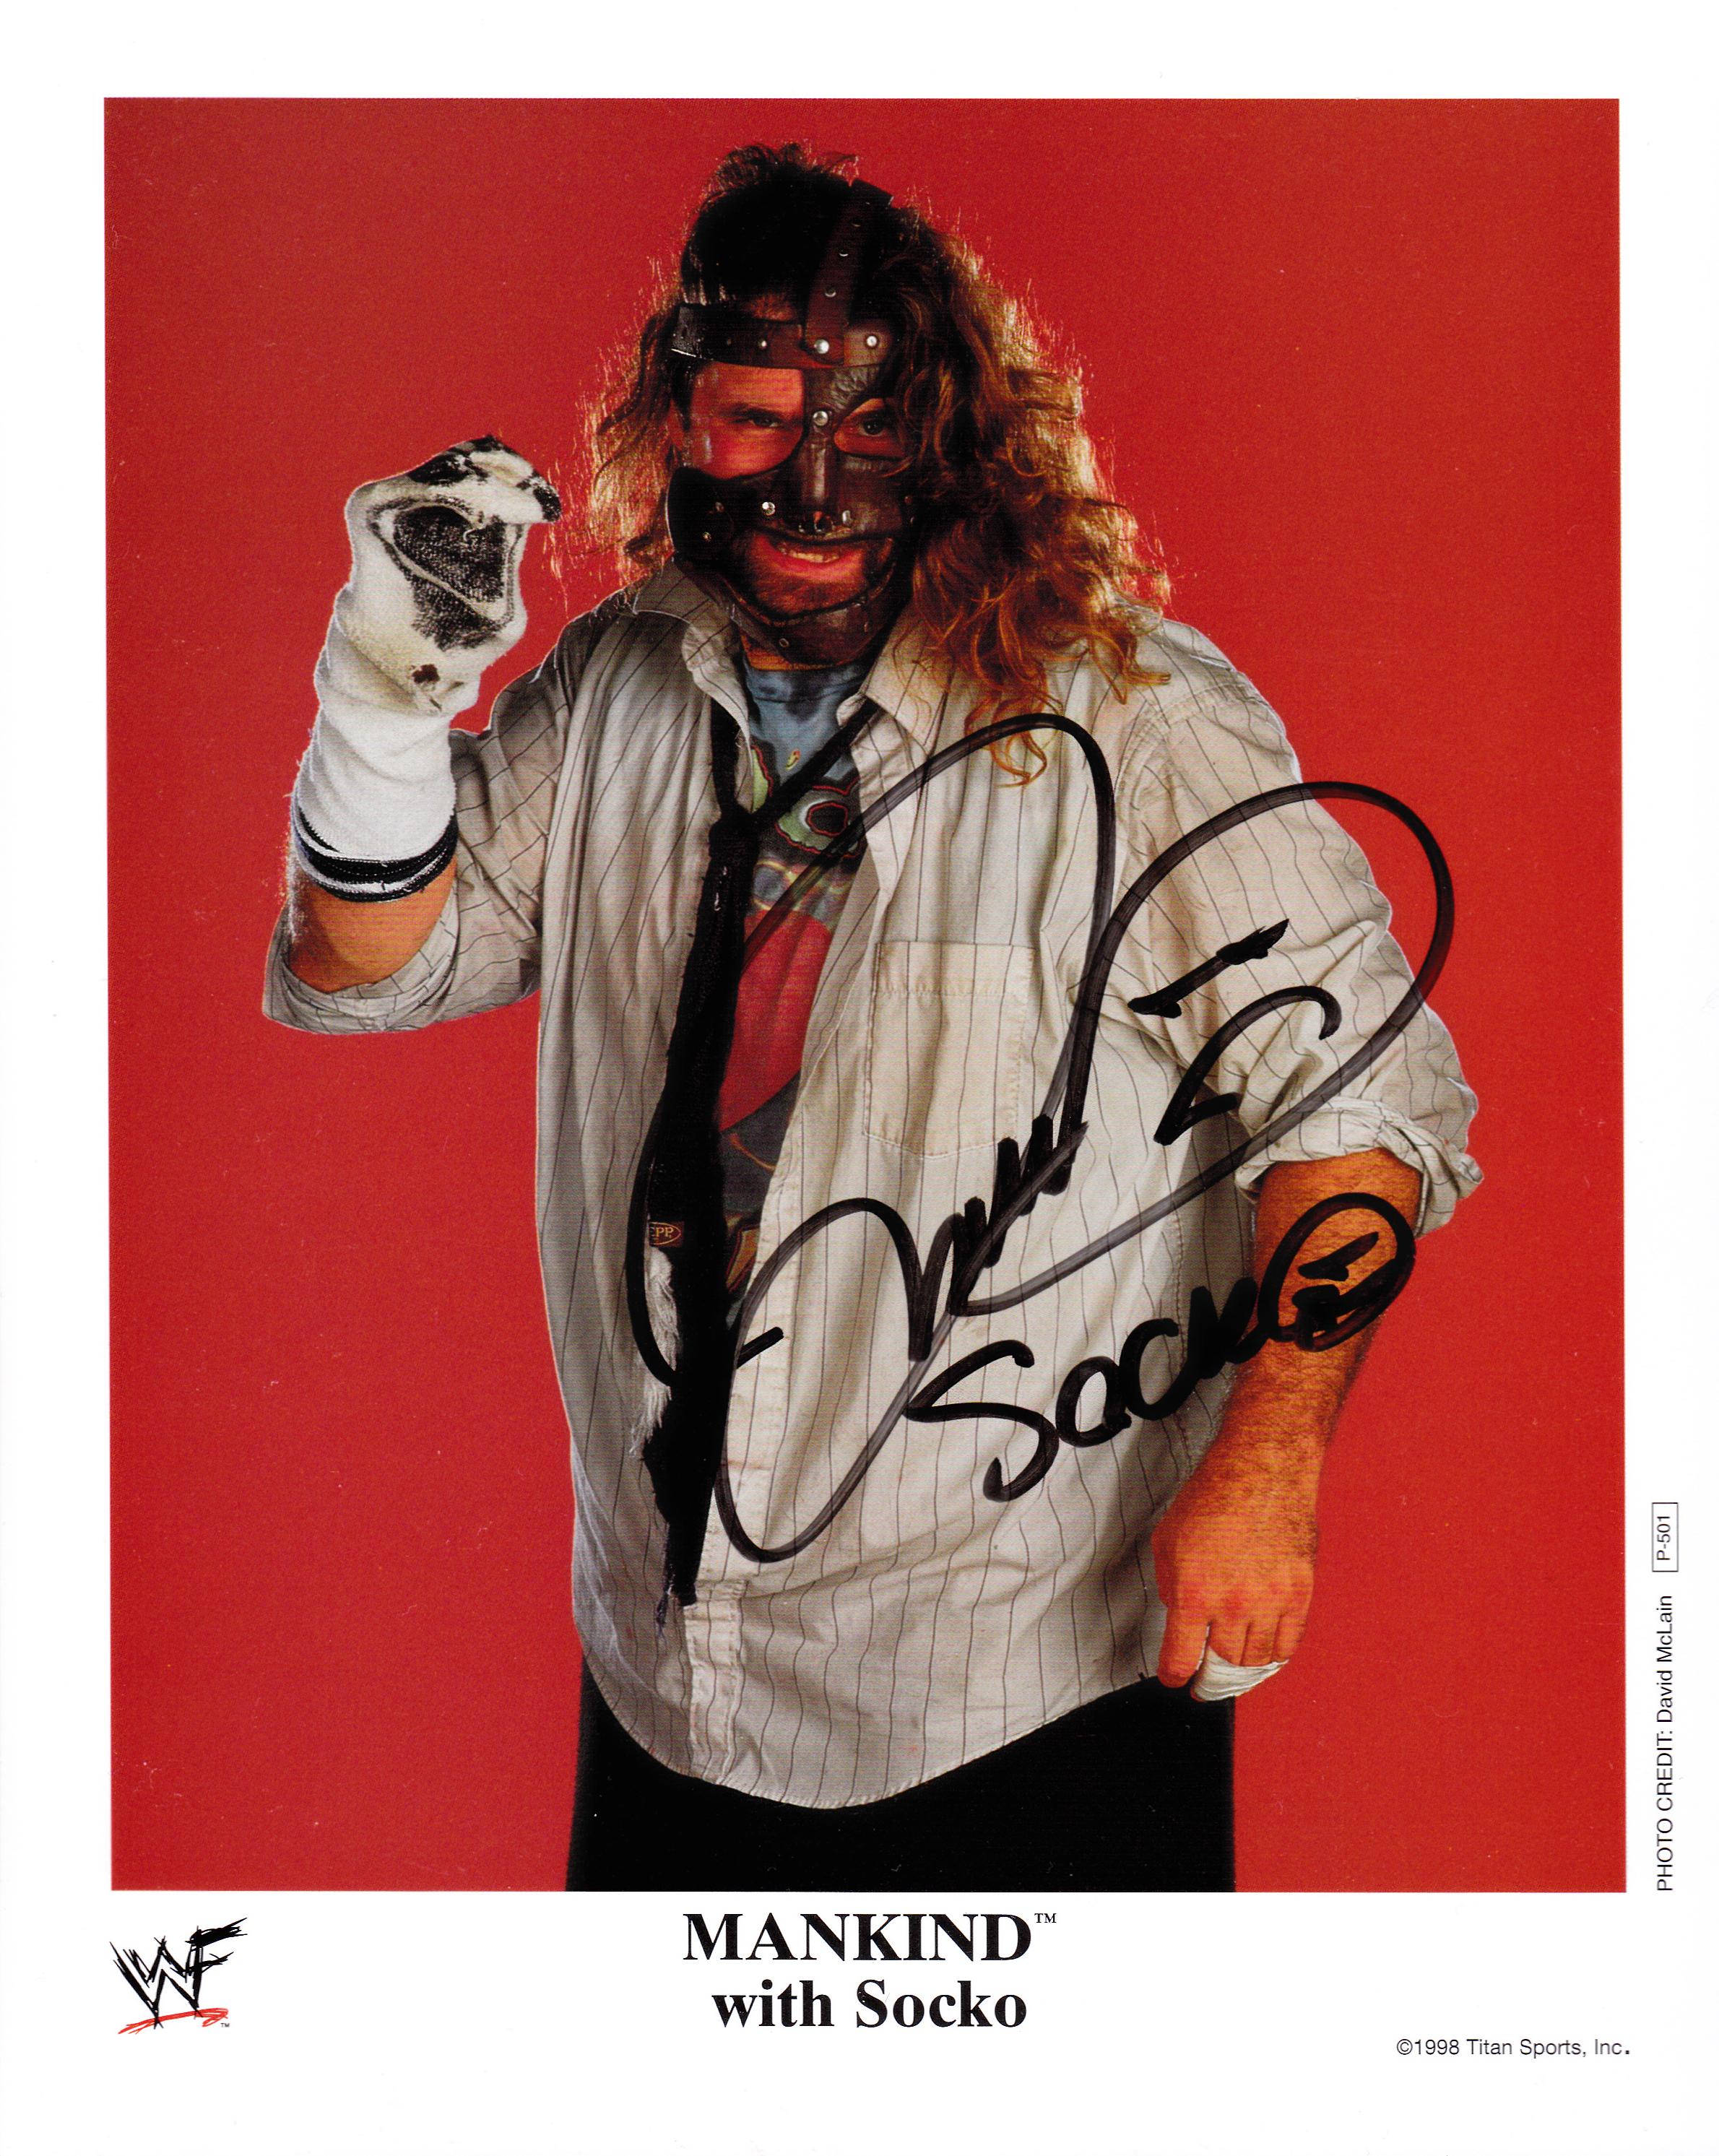 https://photos.imageevent.com/sharpshootercollectibles/wwewwfpromophotos/Mankind%20P-501.jpg